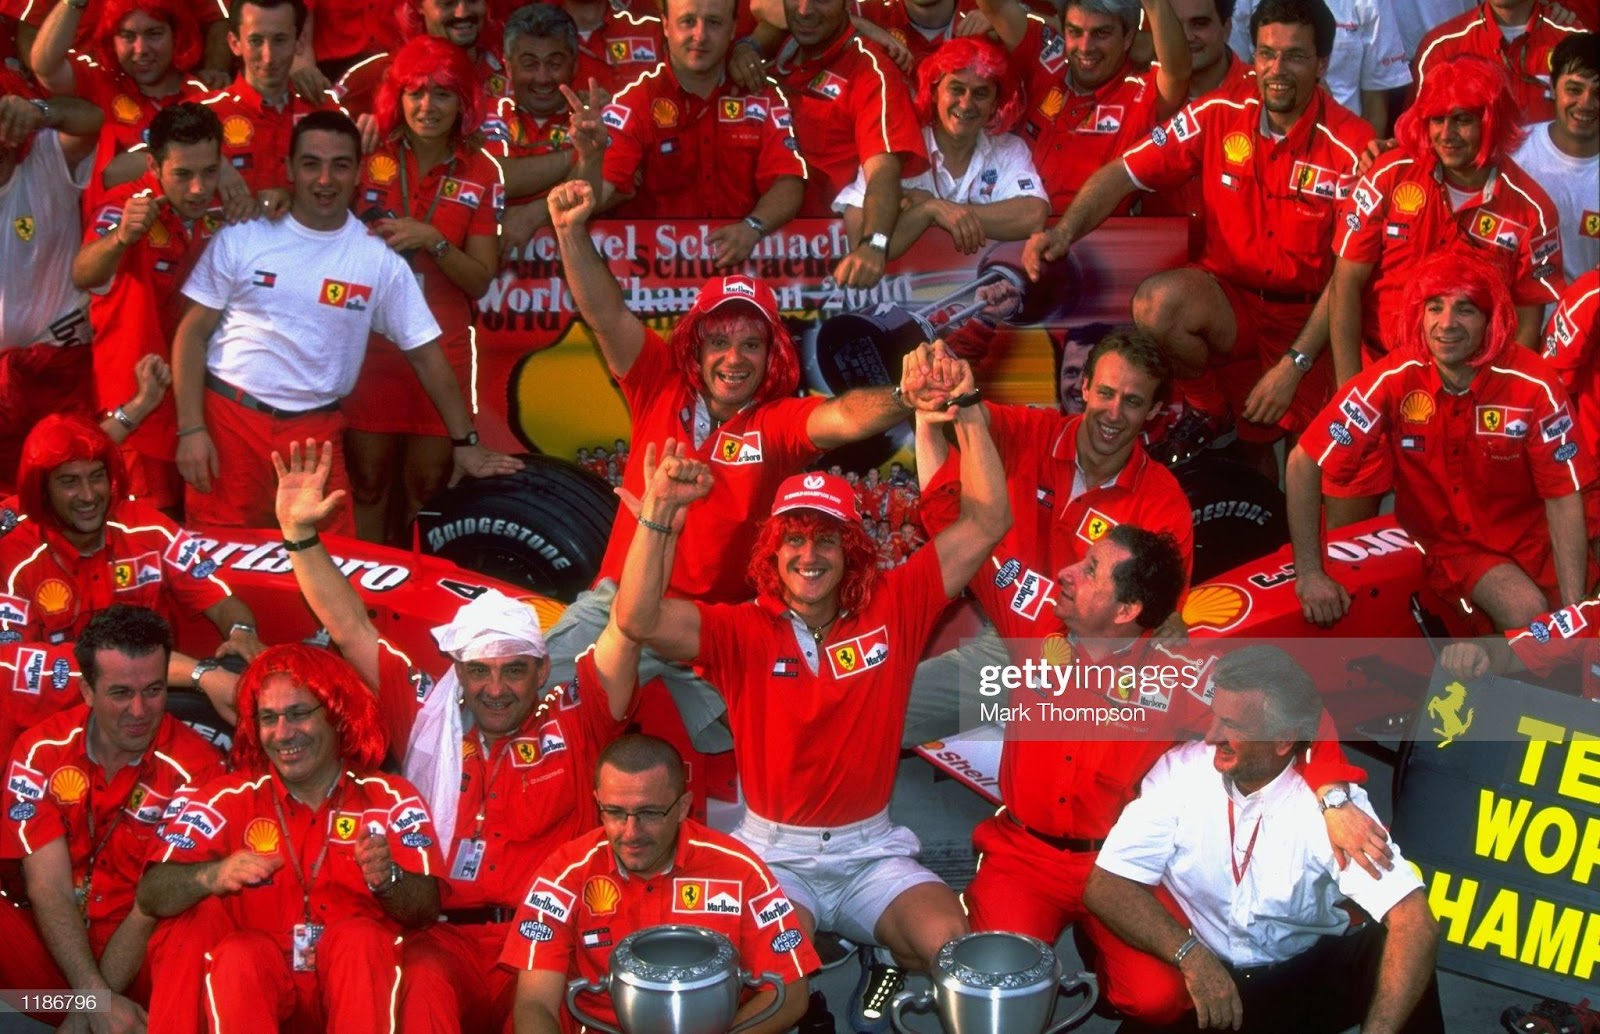 22 October 2000: Michael Schumacher, Ferrari, celebrates winning with the Ferrari team their two titles after the Malaysian F1 Grand Prix at the Sepang Circuit, in Kuala Lumpur.